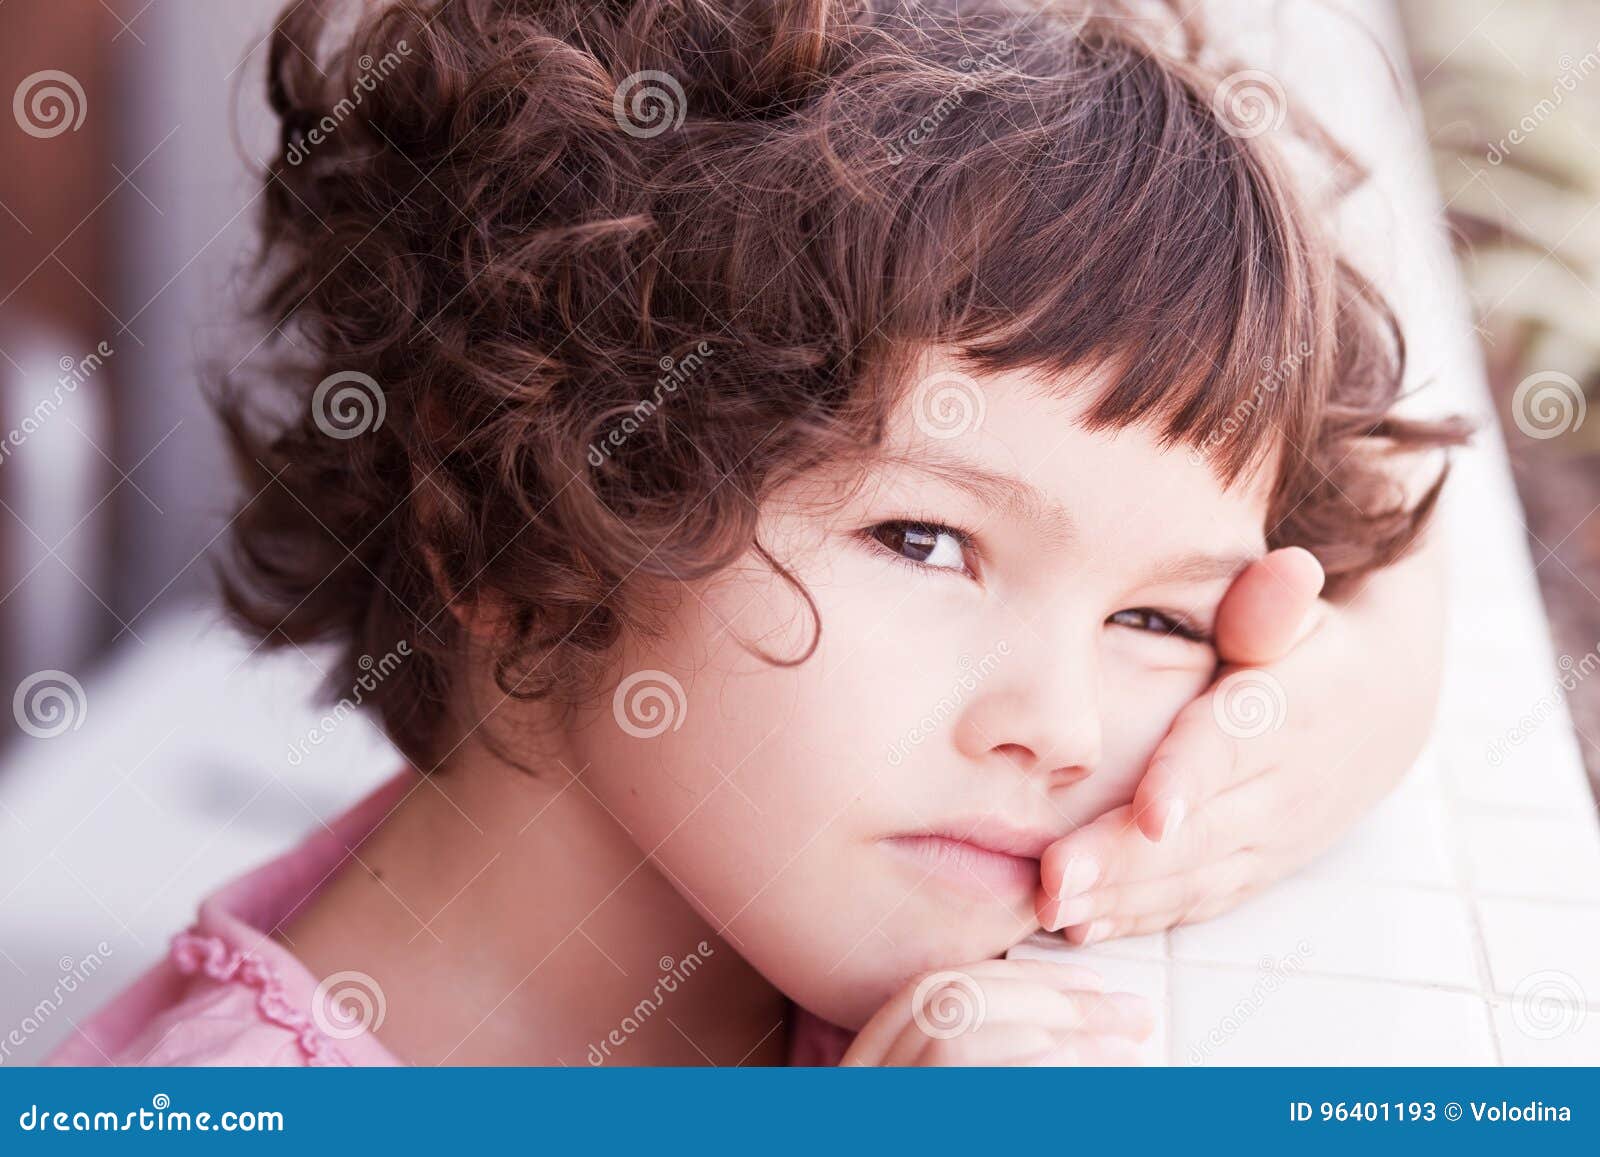 Asian Girl With Curly Short Hair Stock Image Image Of Hair Child 96401193